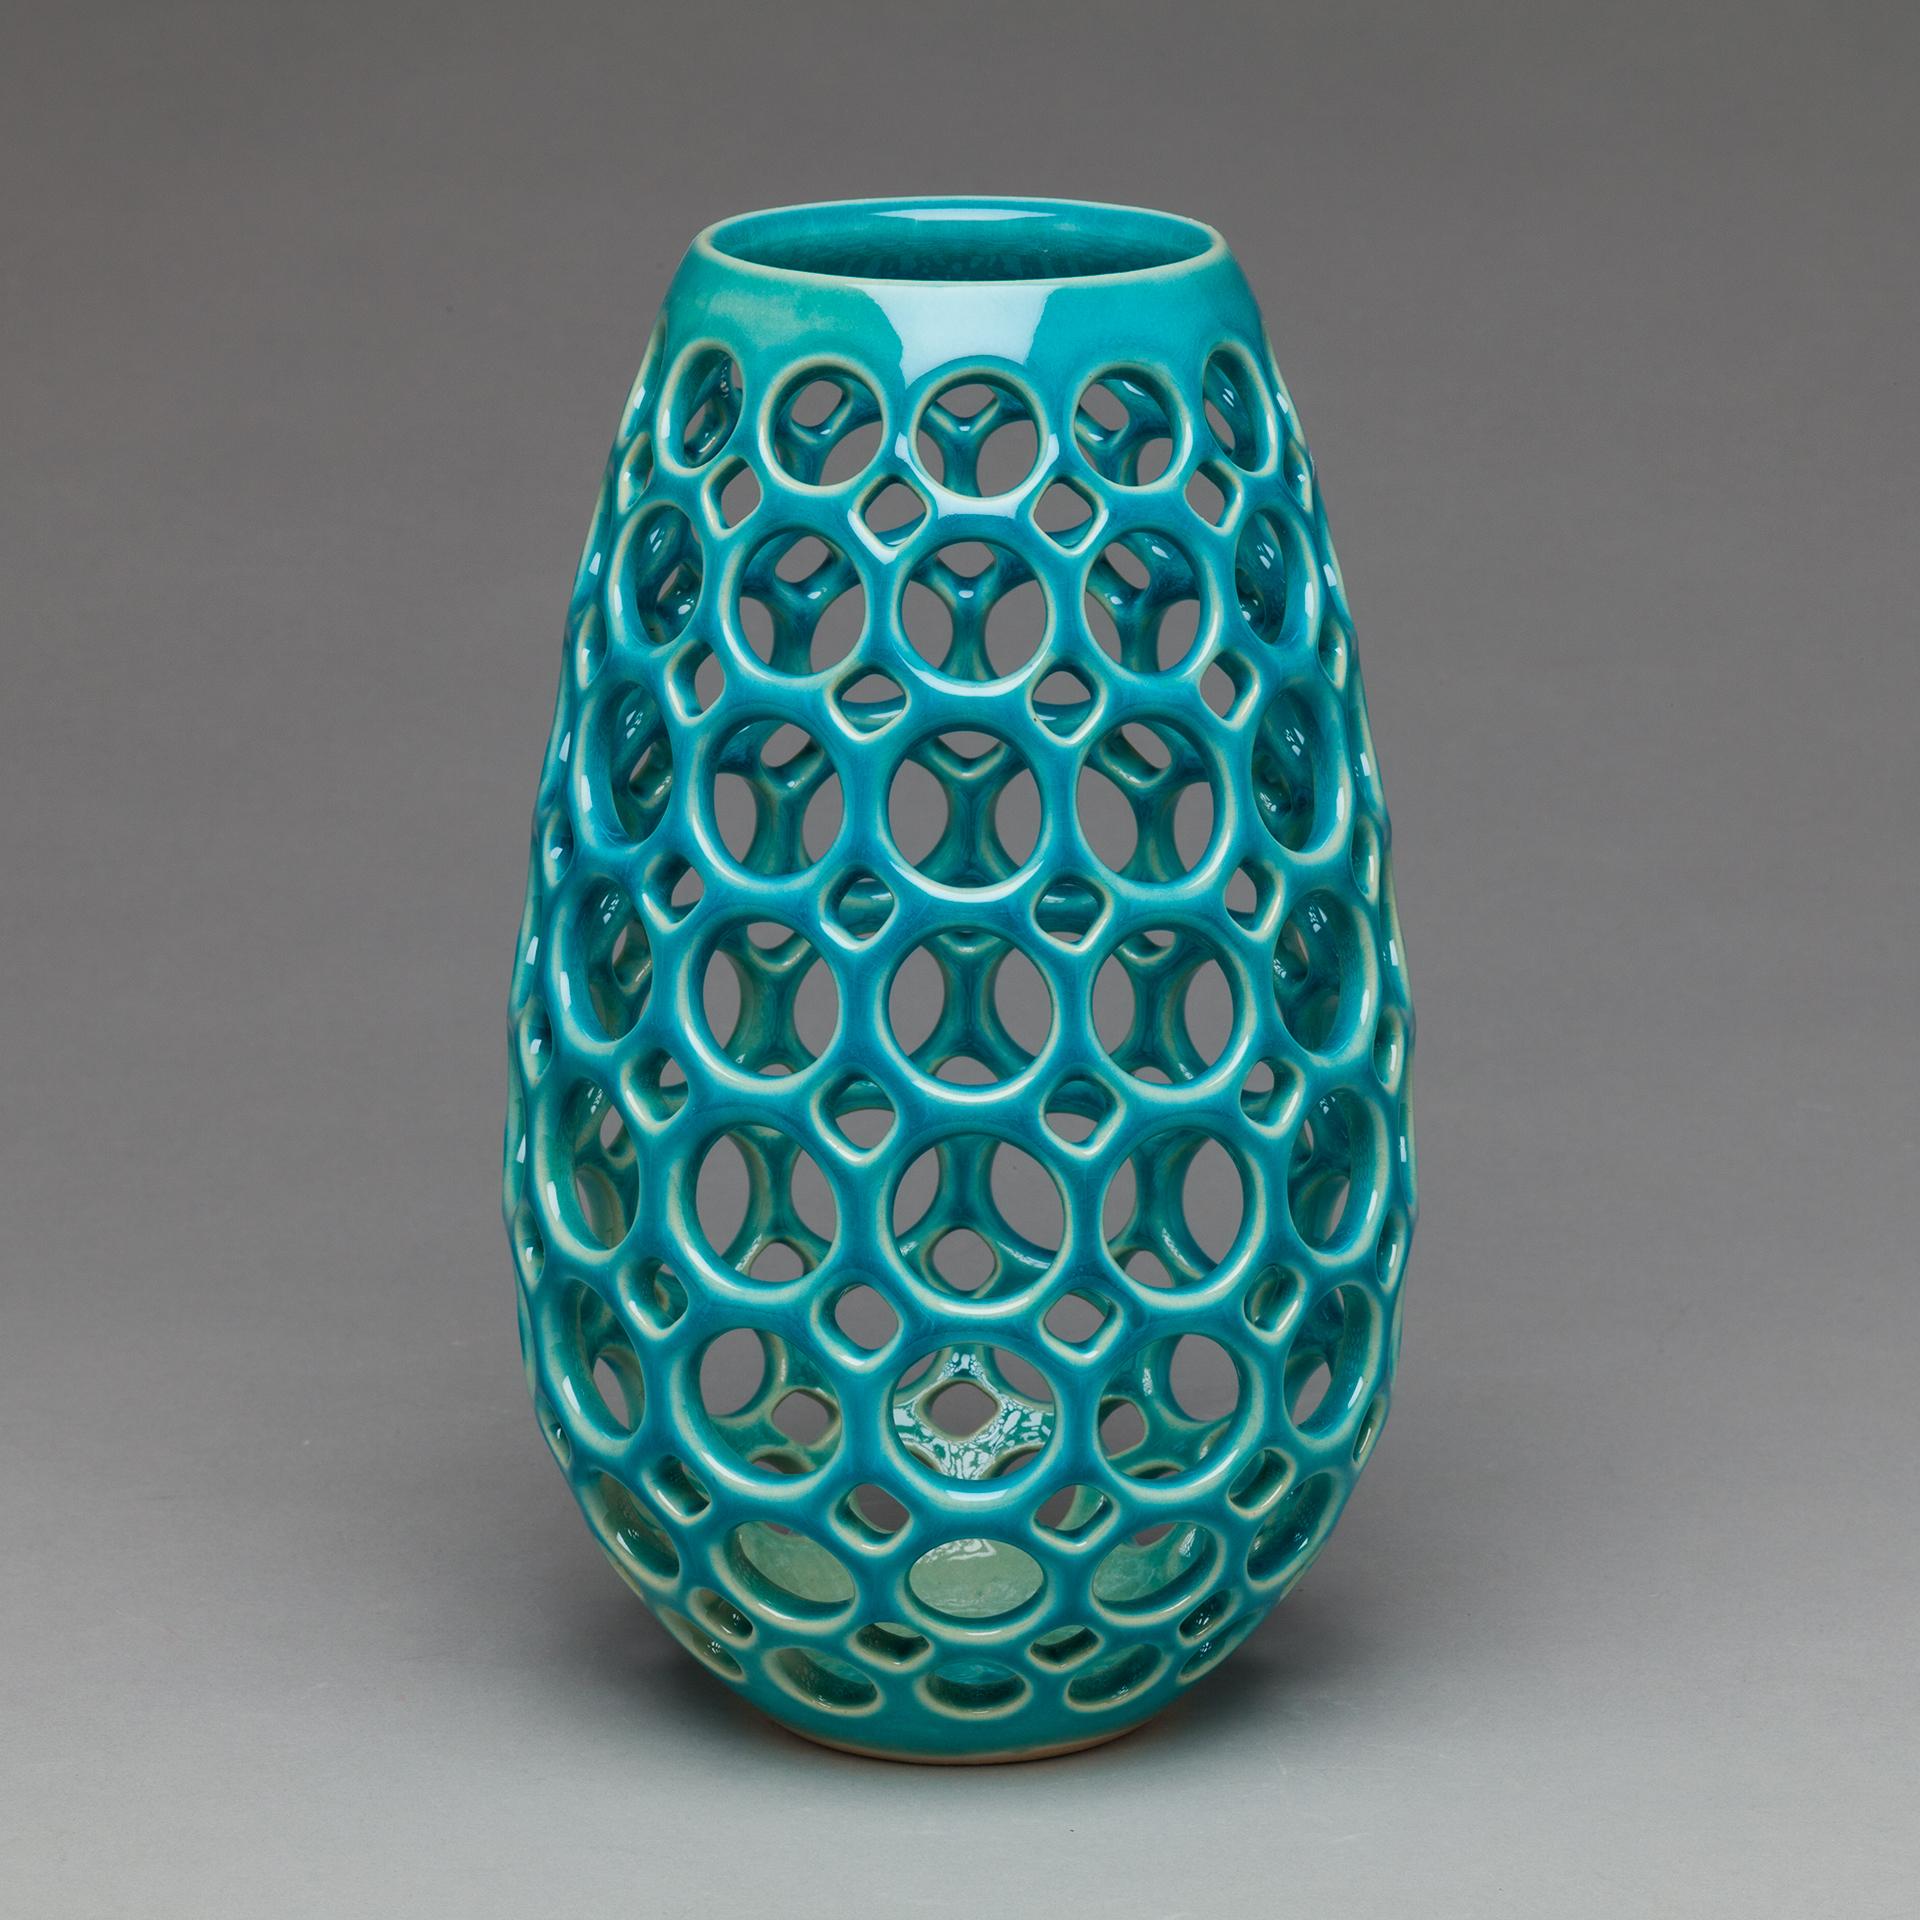 Inspired by Mid-Century Modern design, this piece is wheel thrown and hand pierced stoneware with a satin glaze. Small holes are created when the clay is still wet and then each hole is painstakingly enlarged and smoothed when the clay is bone dry.